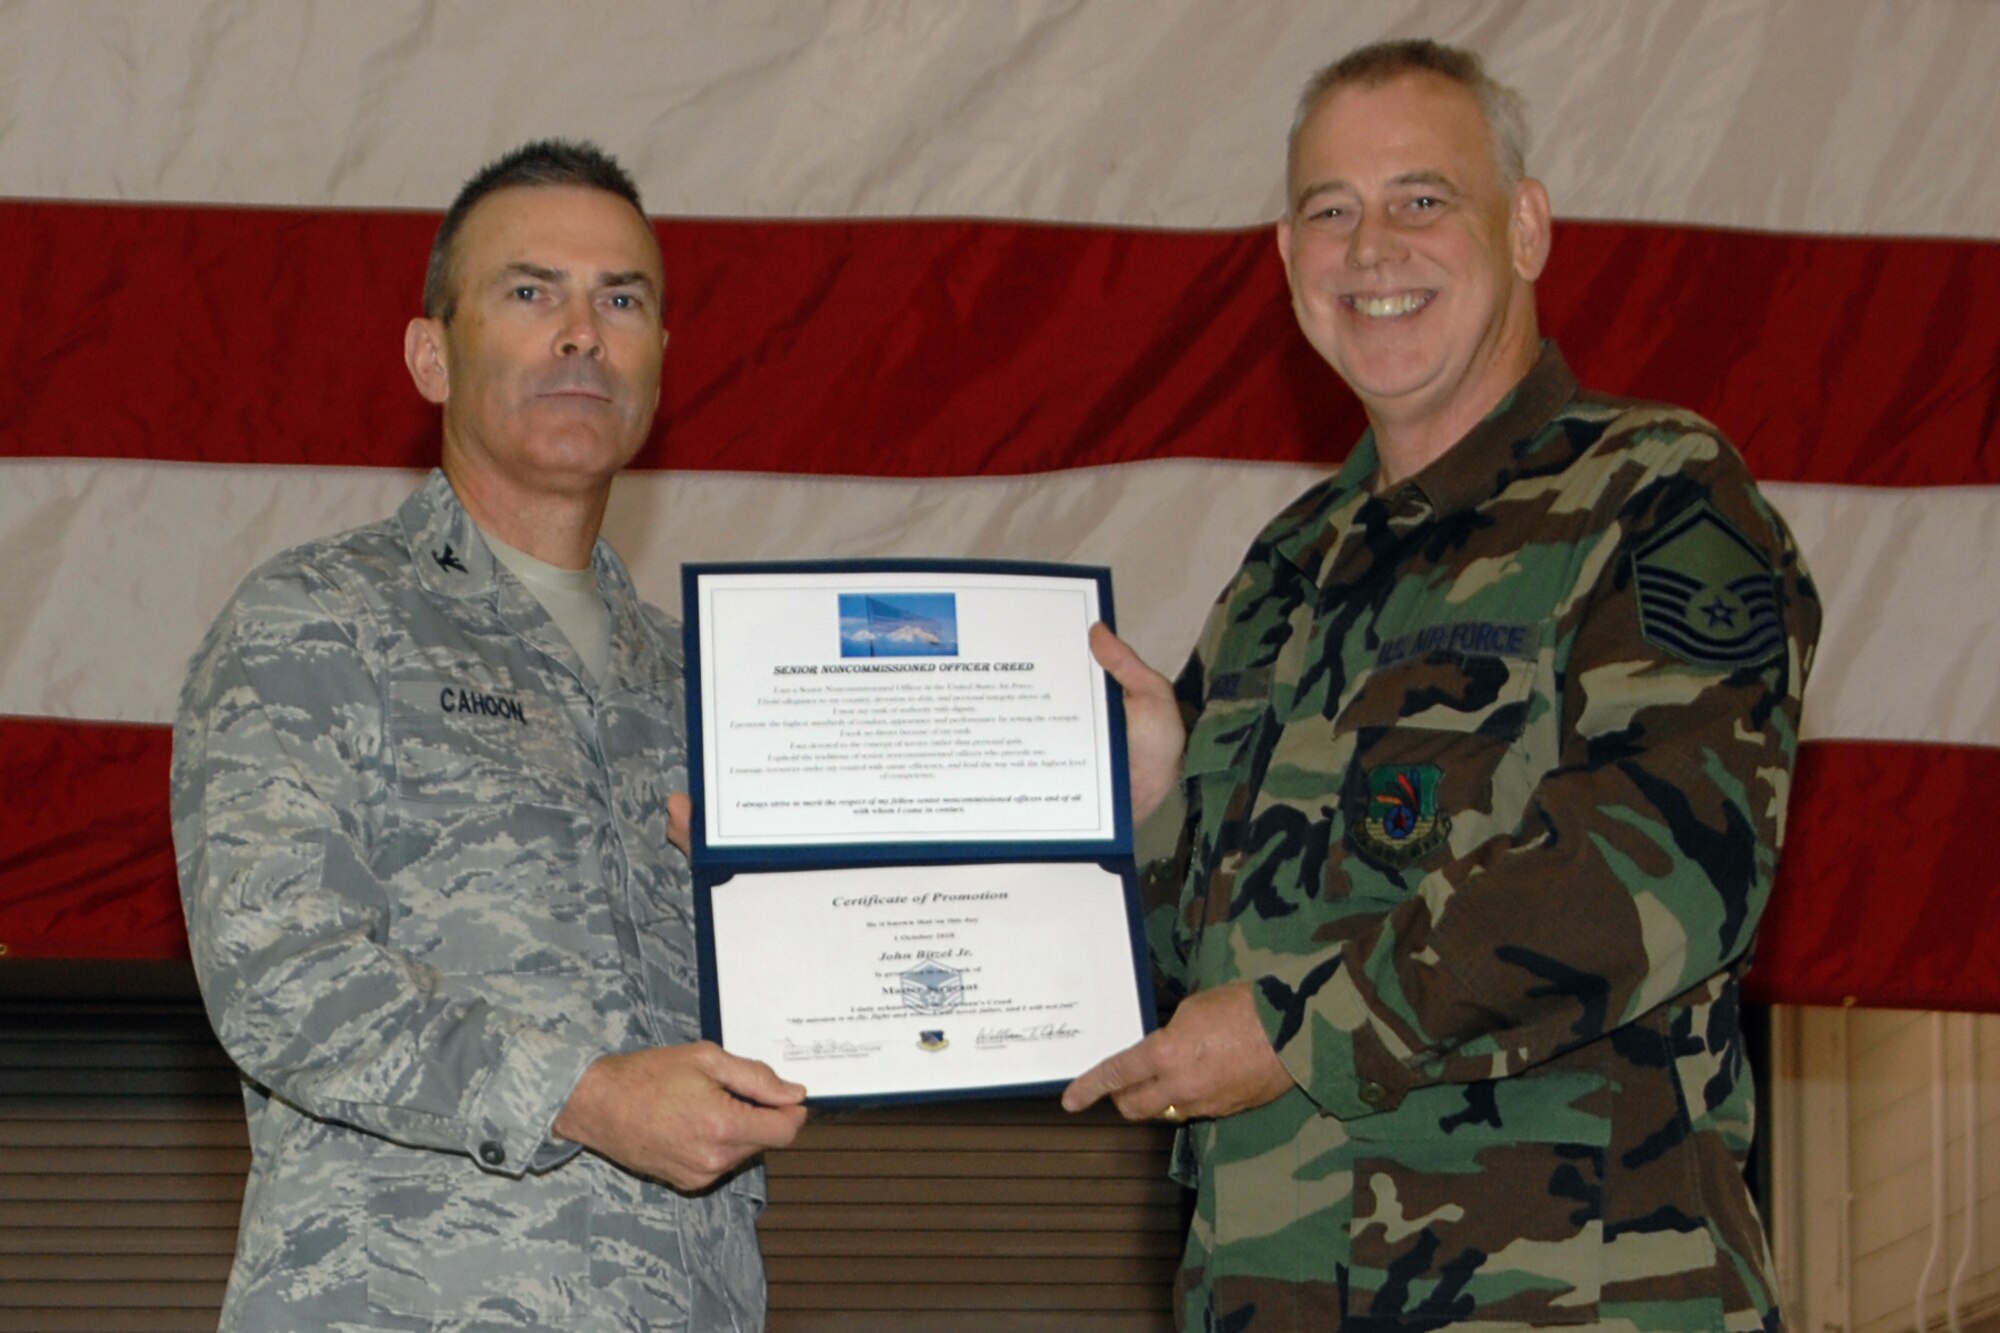 GRISSOM AIR RESERVE BASE, Ind. -- Col. William T. "Tim" Cahoon presents Master Sgt. John E. Bitzel, Jr., with a certificate of promotion as he is inducted into the senior noncommissioned officer ranks during the November unit training assembly. Sergeant Bitzel is a combat crew communications specialist with the 434th Operations Support Squadron. Colonel Cahoon is the 434th Air Refueling Wing commander. (U.S. Air Force photo/Senior Airman Carl Berry)
